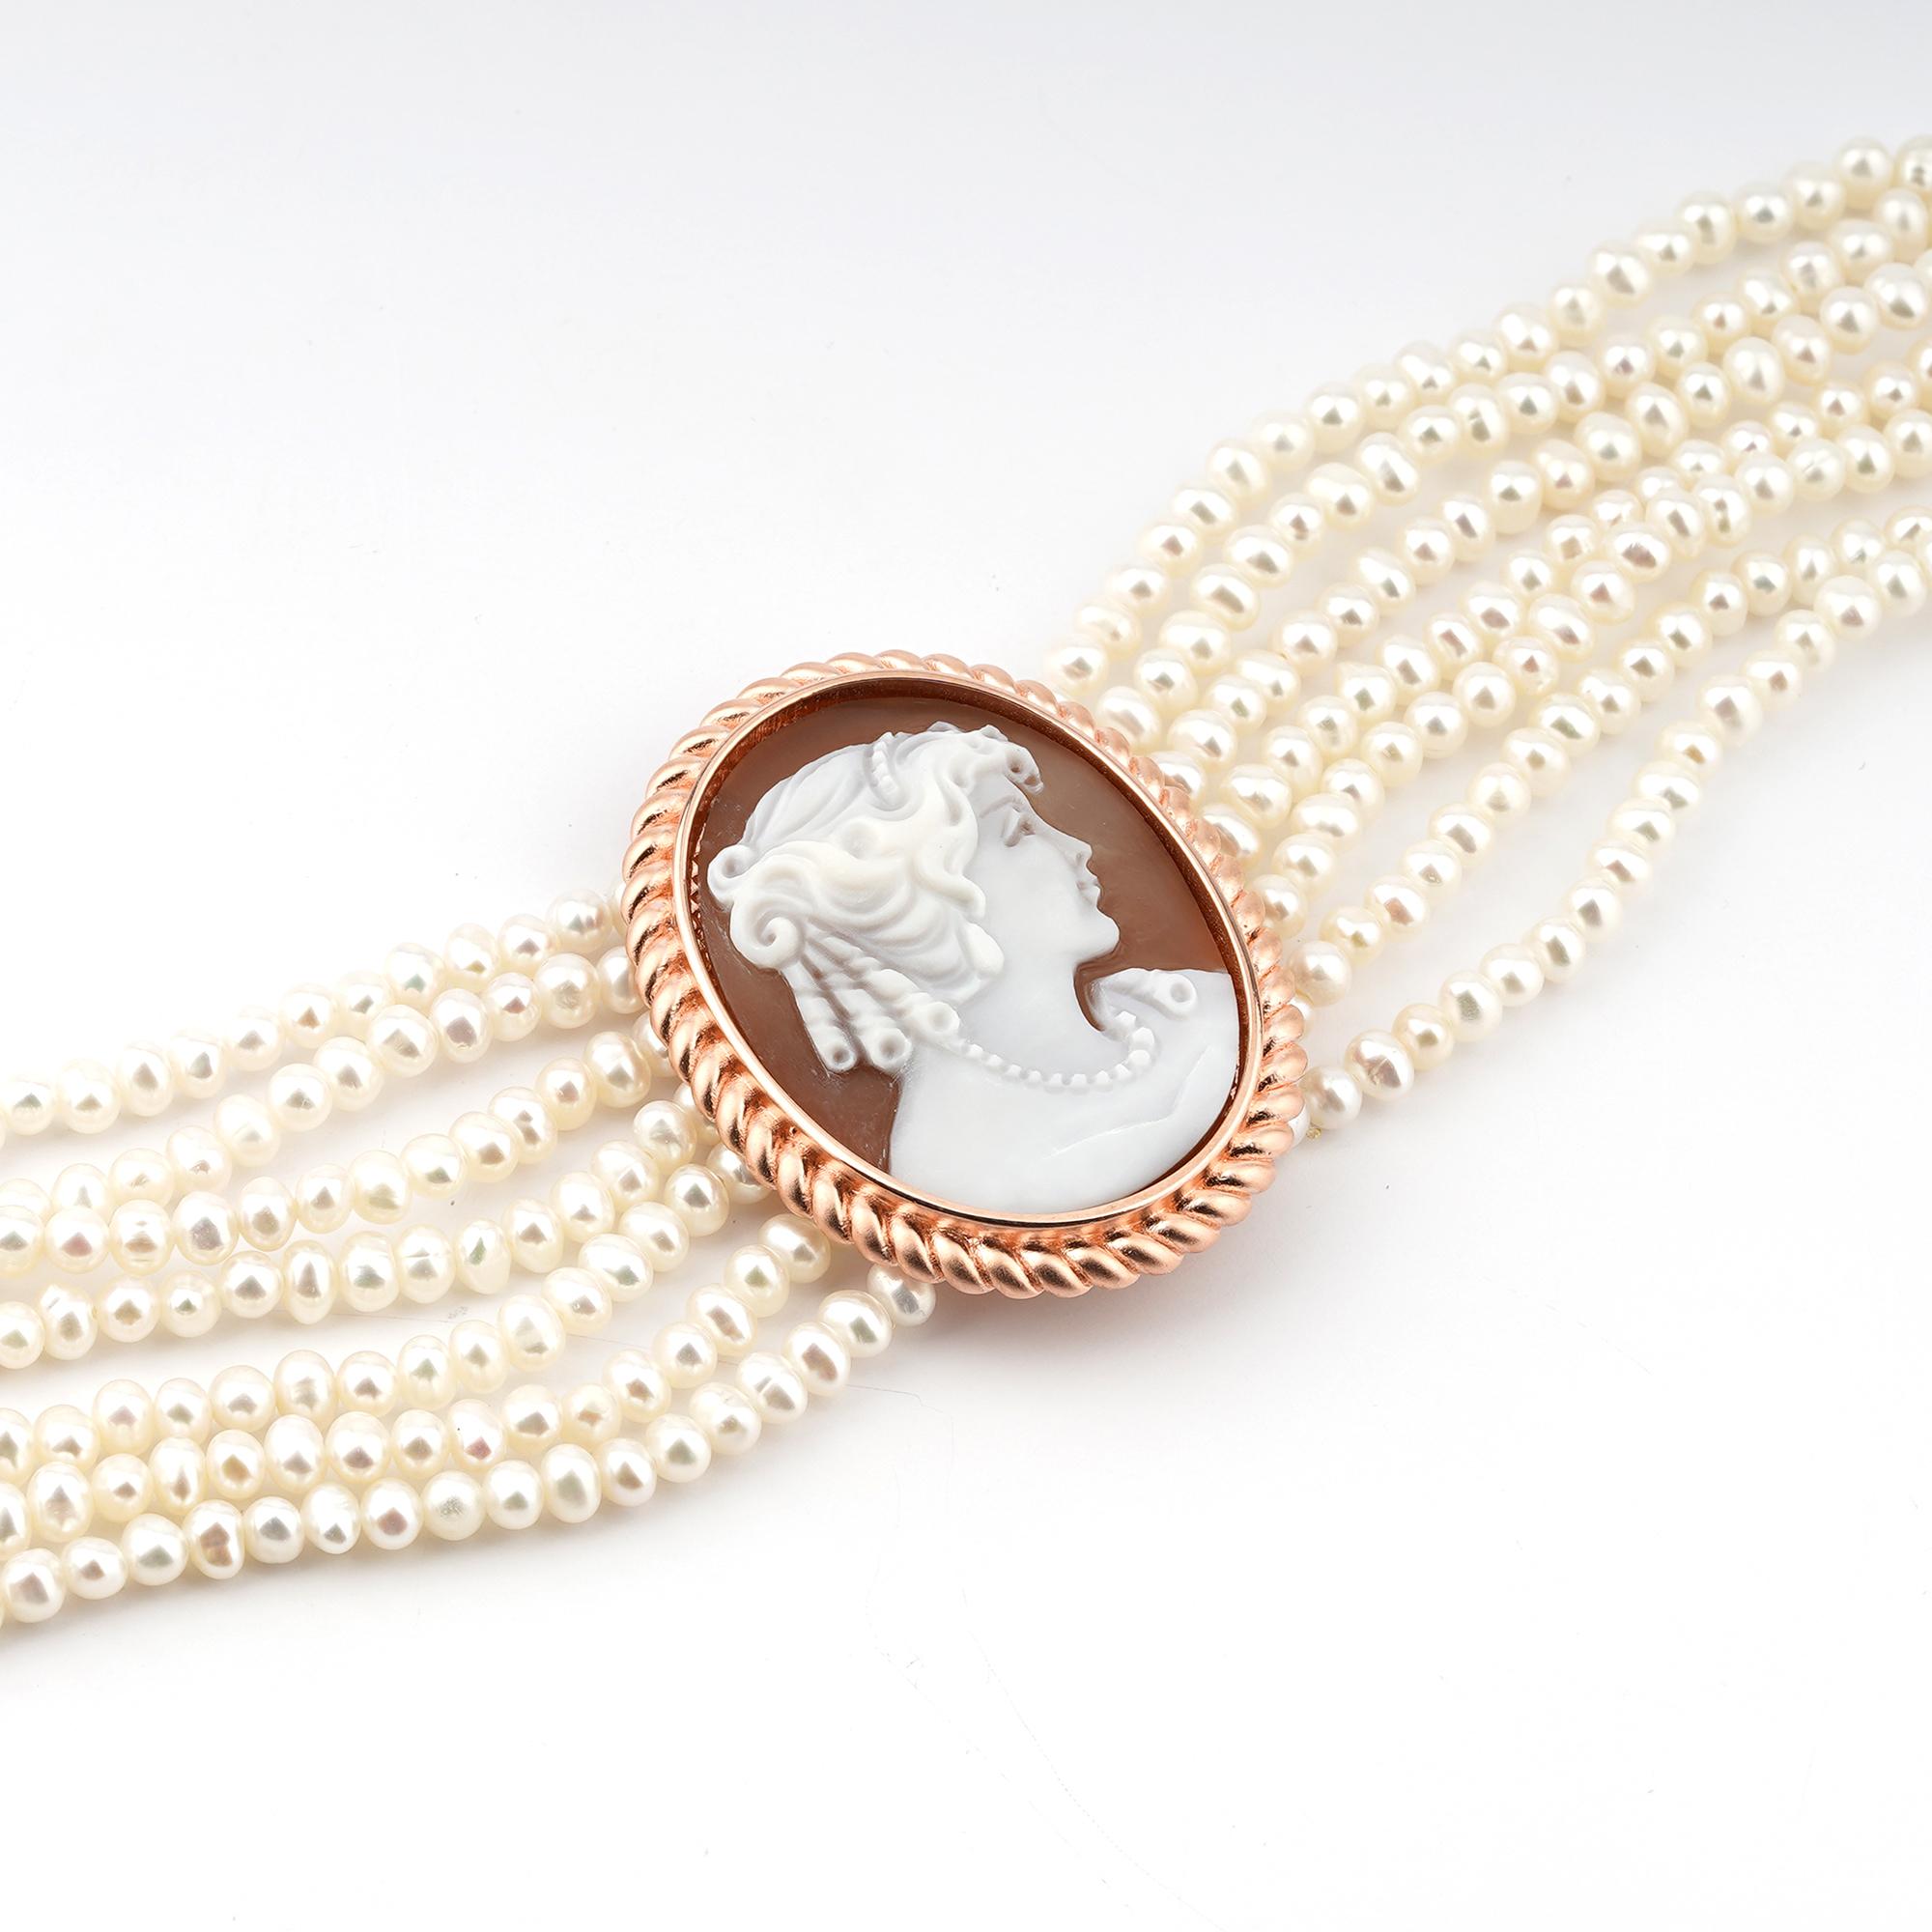 18 carat Rose Gold Plated 925 Sterling Silver with 38mm Sea Shell Cameo bracelet. Fully handcarved Portrait on a sea shell cameo set in a 18kt Rose Gold plated silver Bracelet with freshwater pearls. Carvings are performed by our master artisans